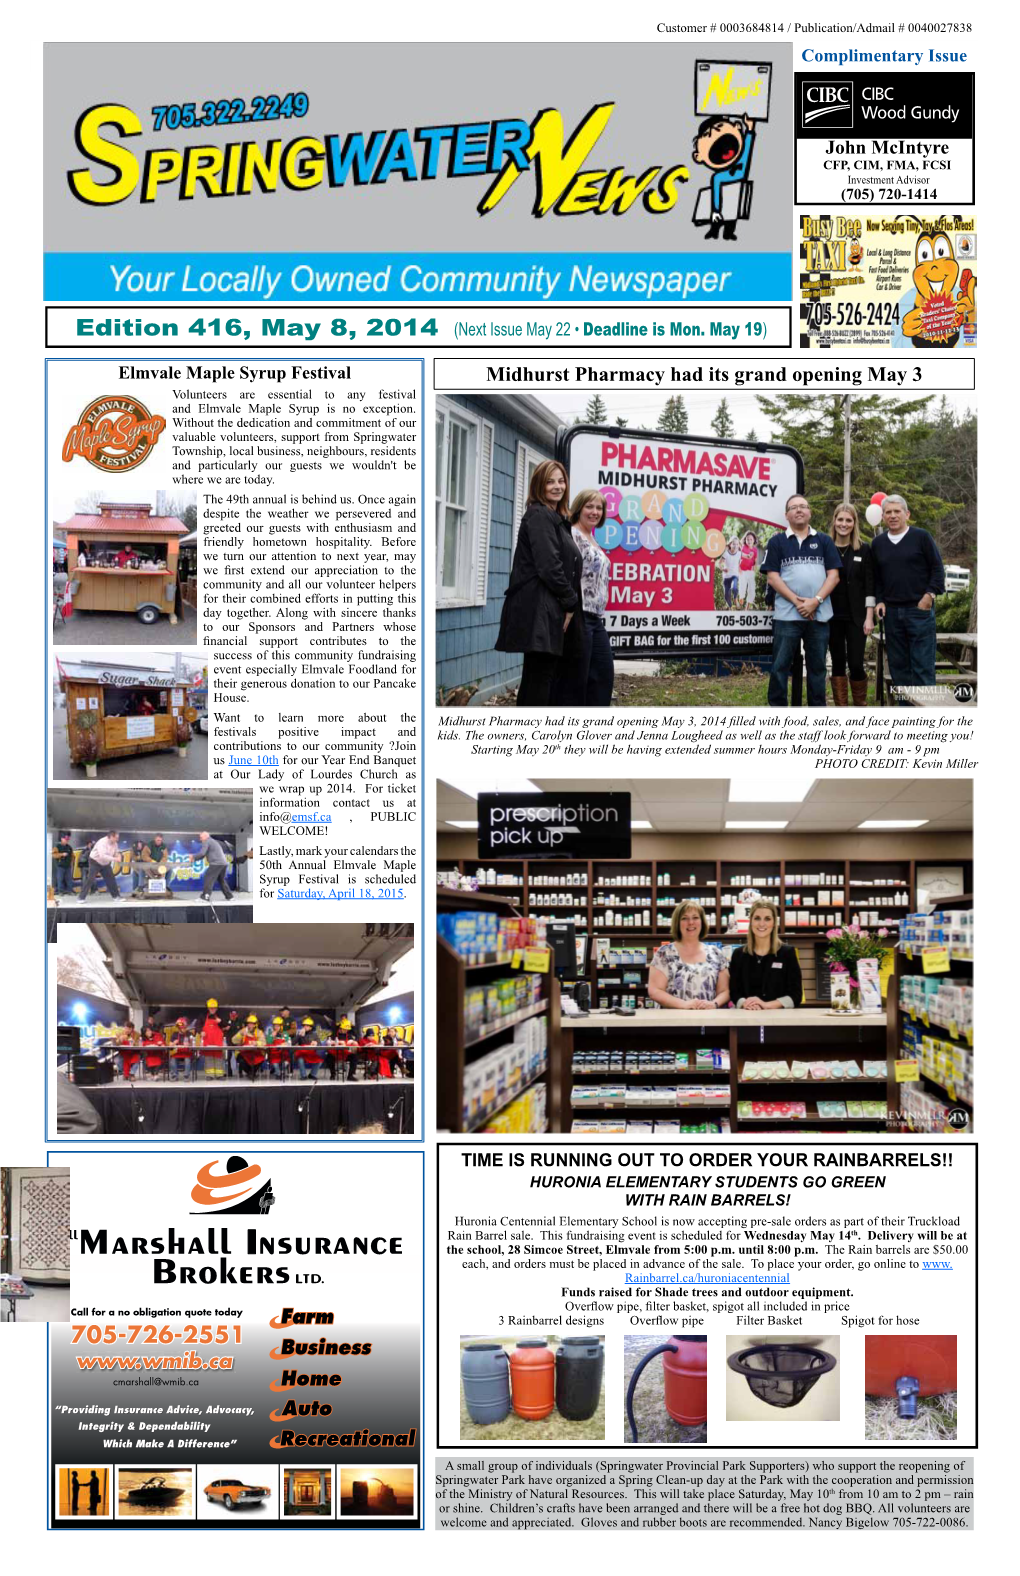 Midhurst Pharmacy Had Its Grand Opening May 3 Volunteers Are Essential to Any Festival and Elmvale Maple Syrup Is No Exception